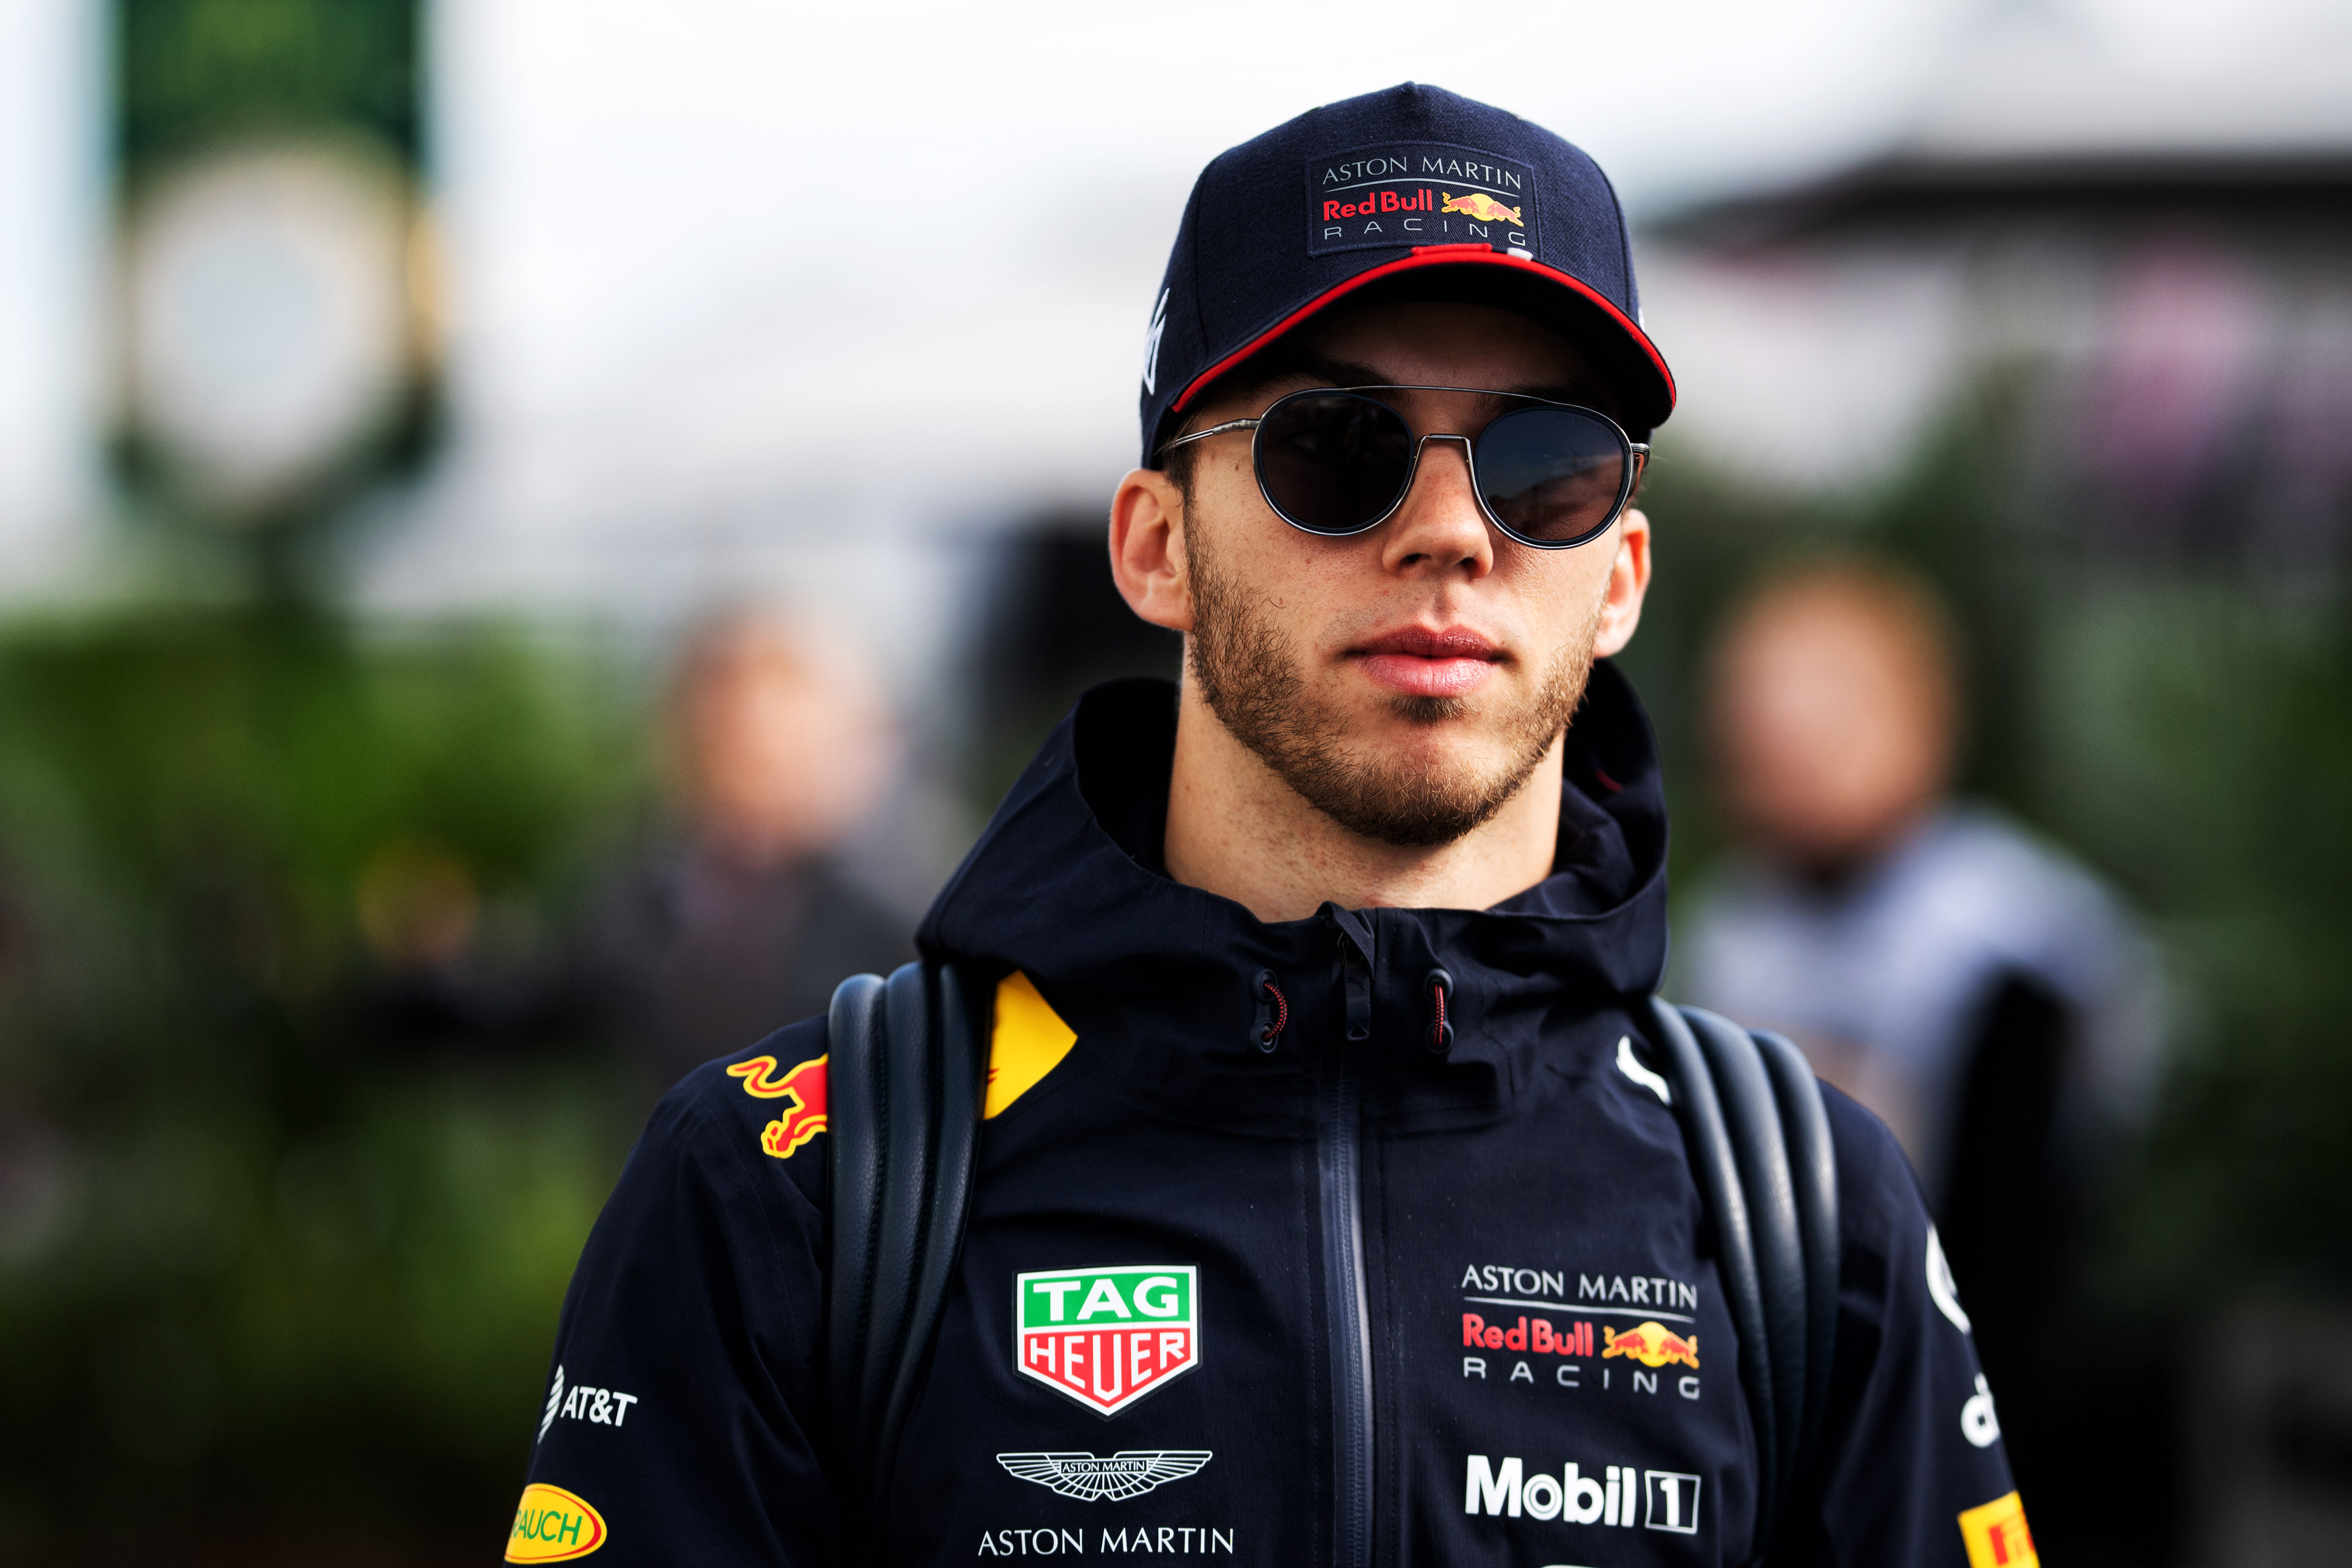 Why Red Bull want Gasly - Race